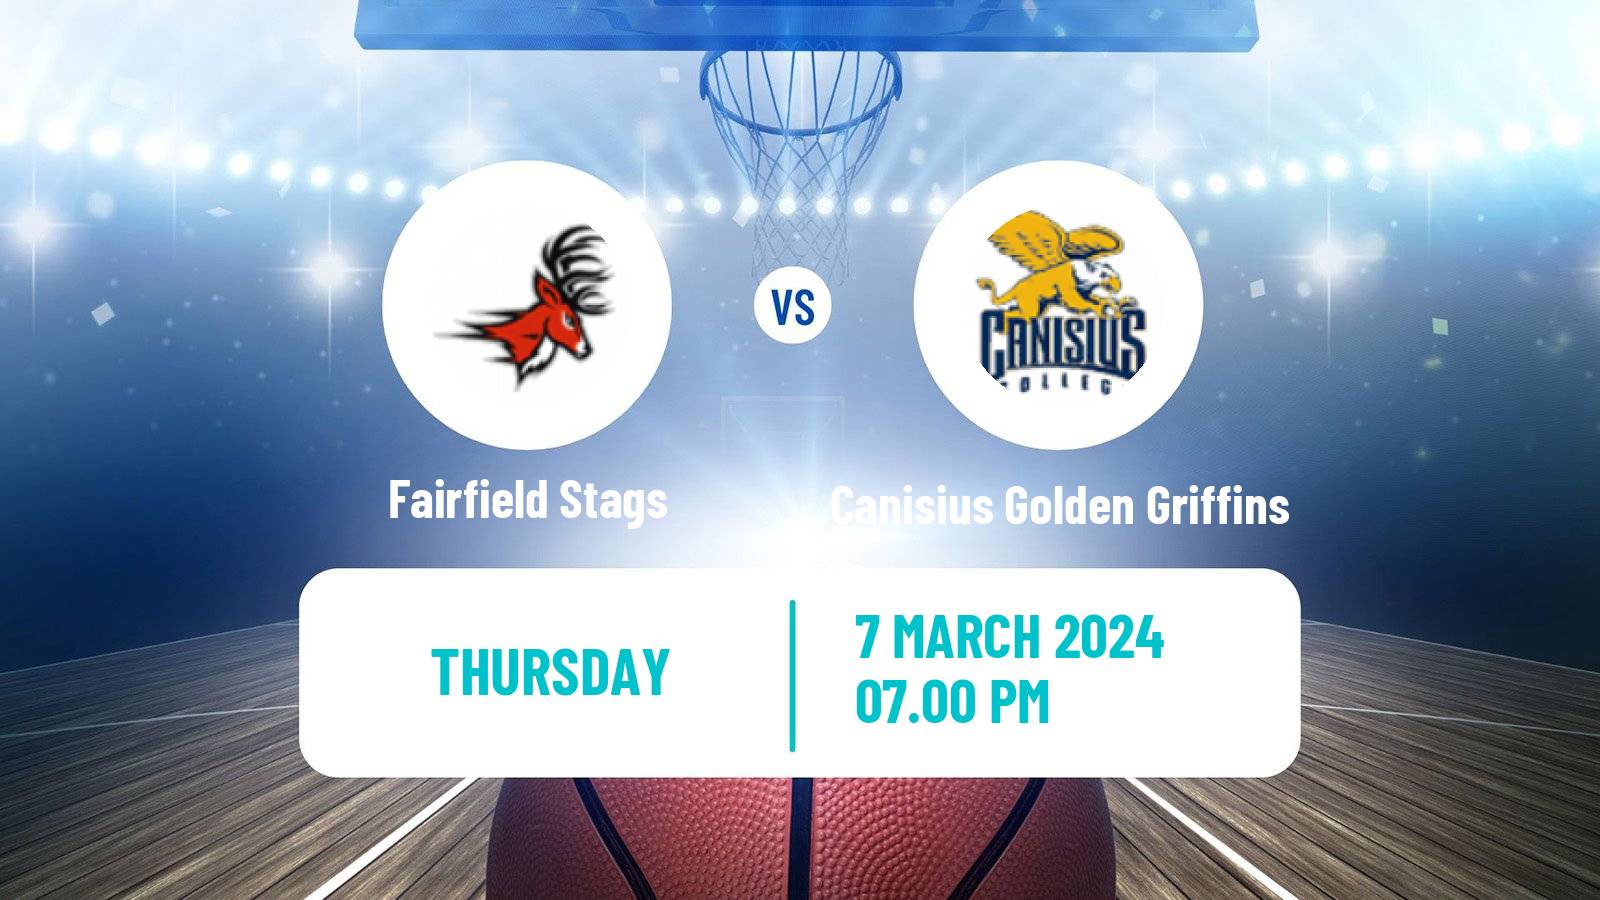 Basketball NCAA College Basketball Fairfield Stags - Canisius Golden Griffins